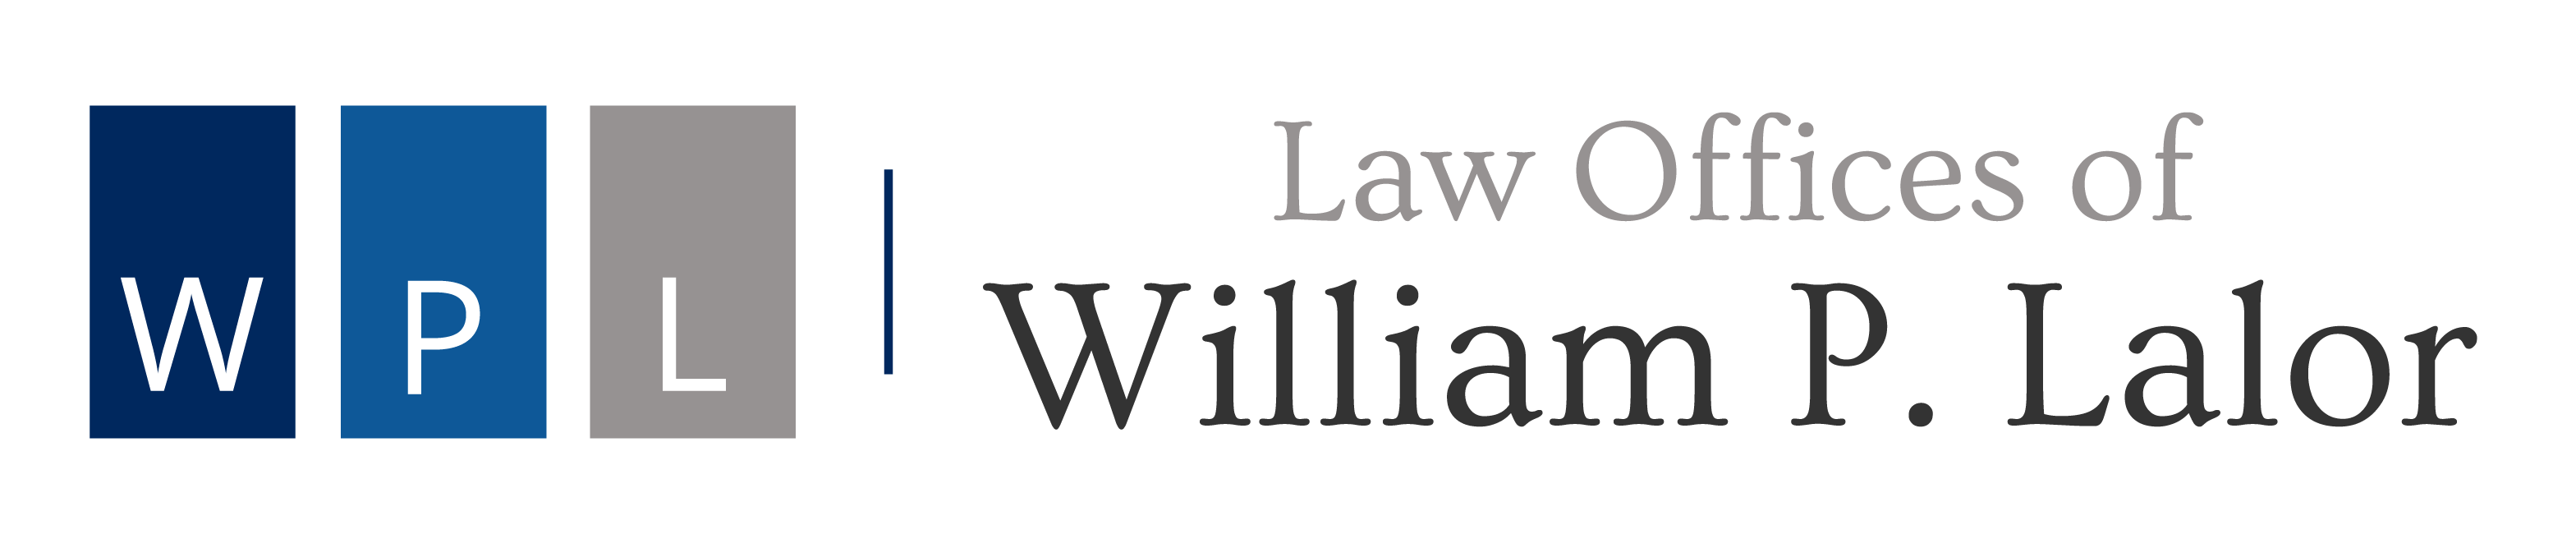 Law Offices of William P. Lalor